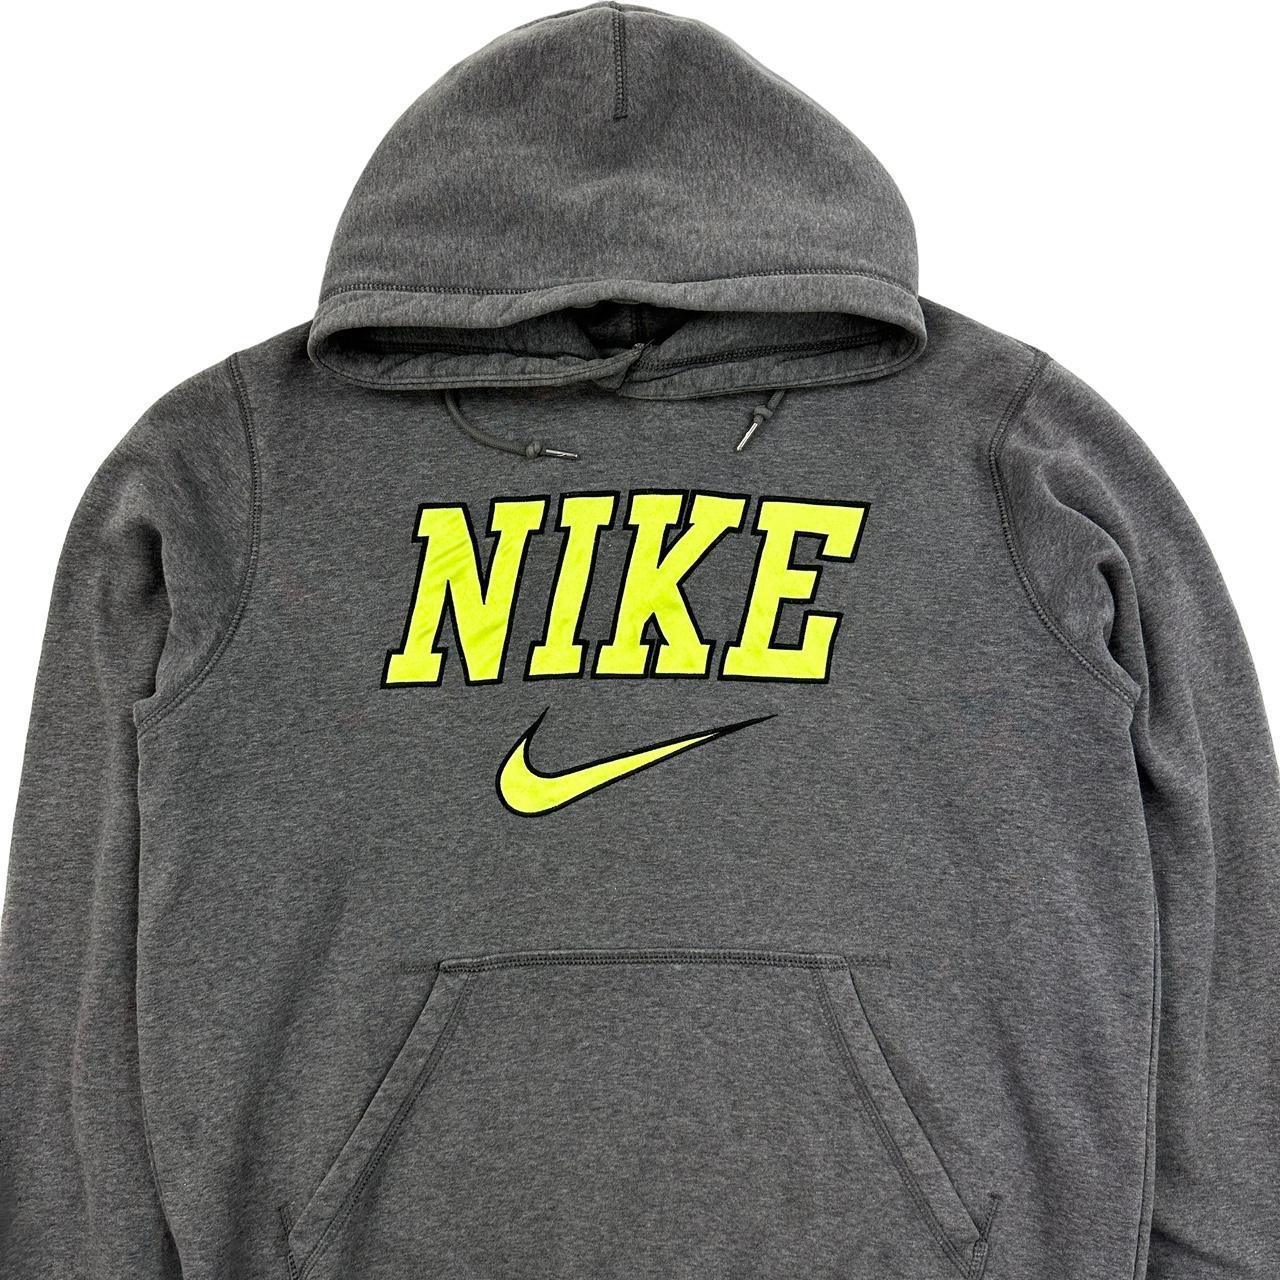 Nike logo hoodie size S - Known Source